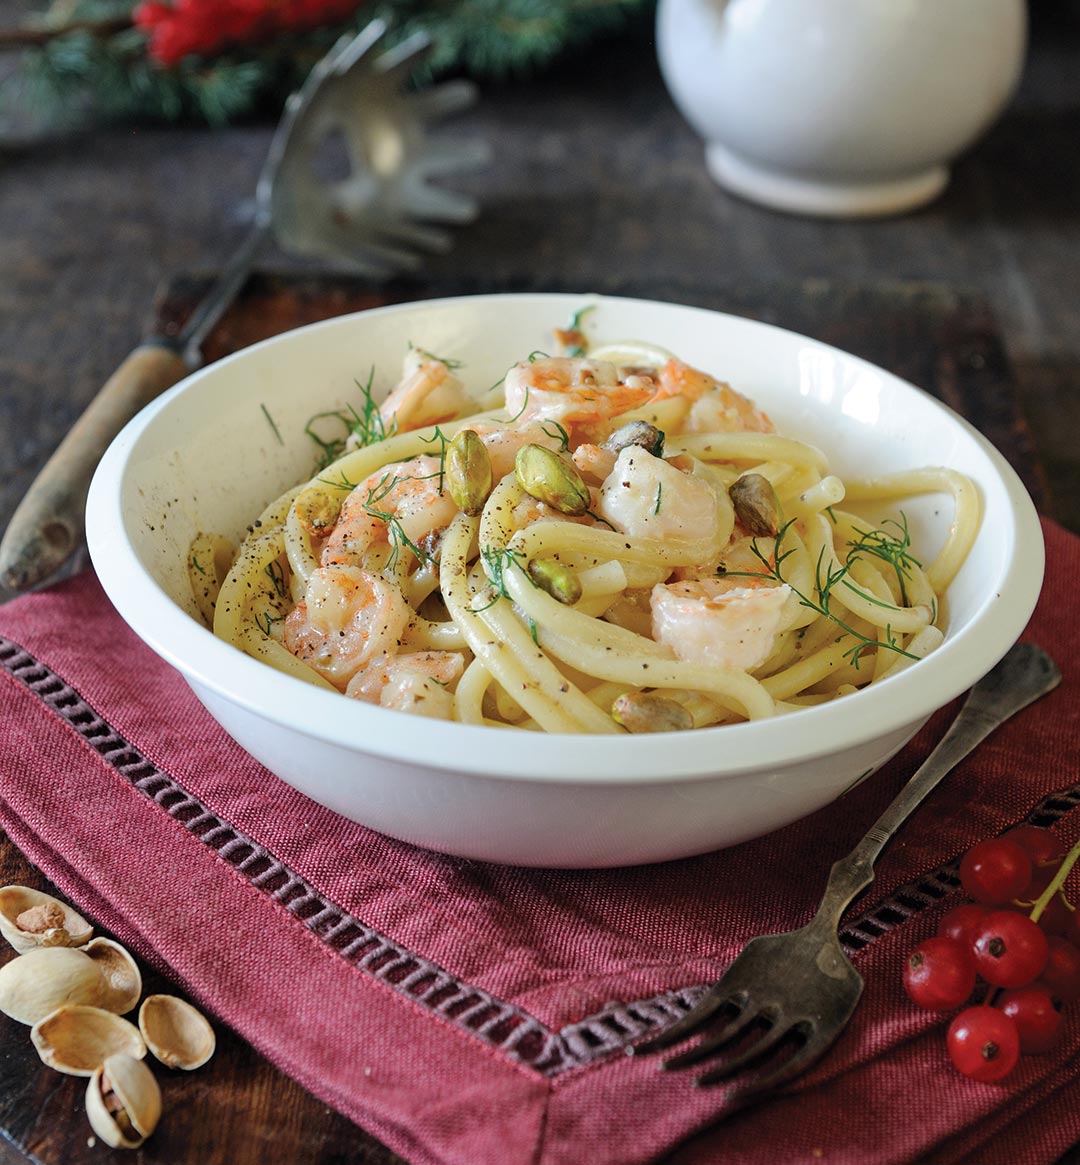 Spaghetti with prawns and pistachio nuts